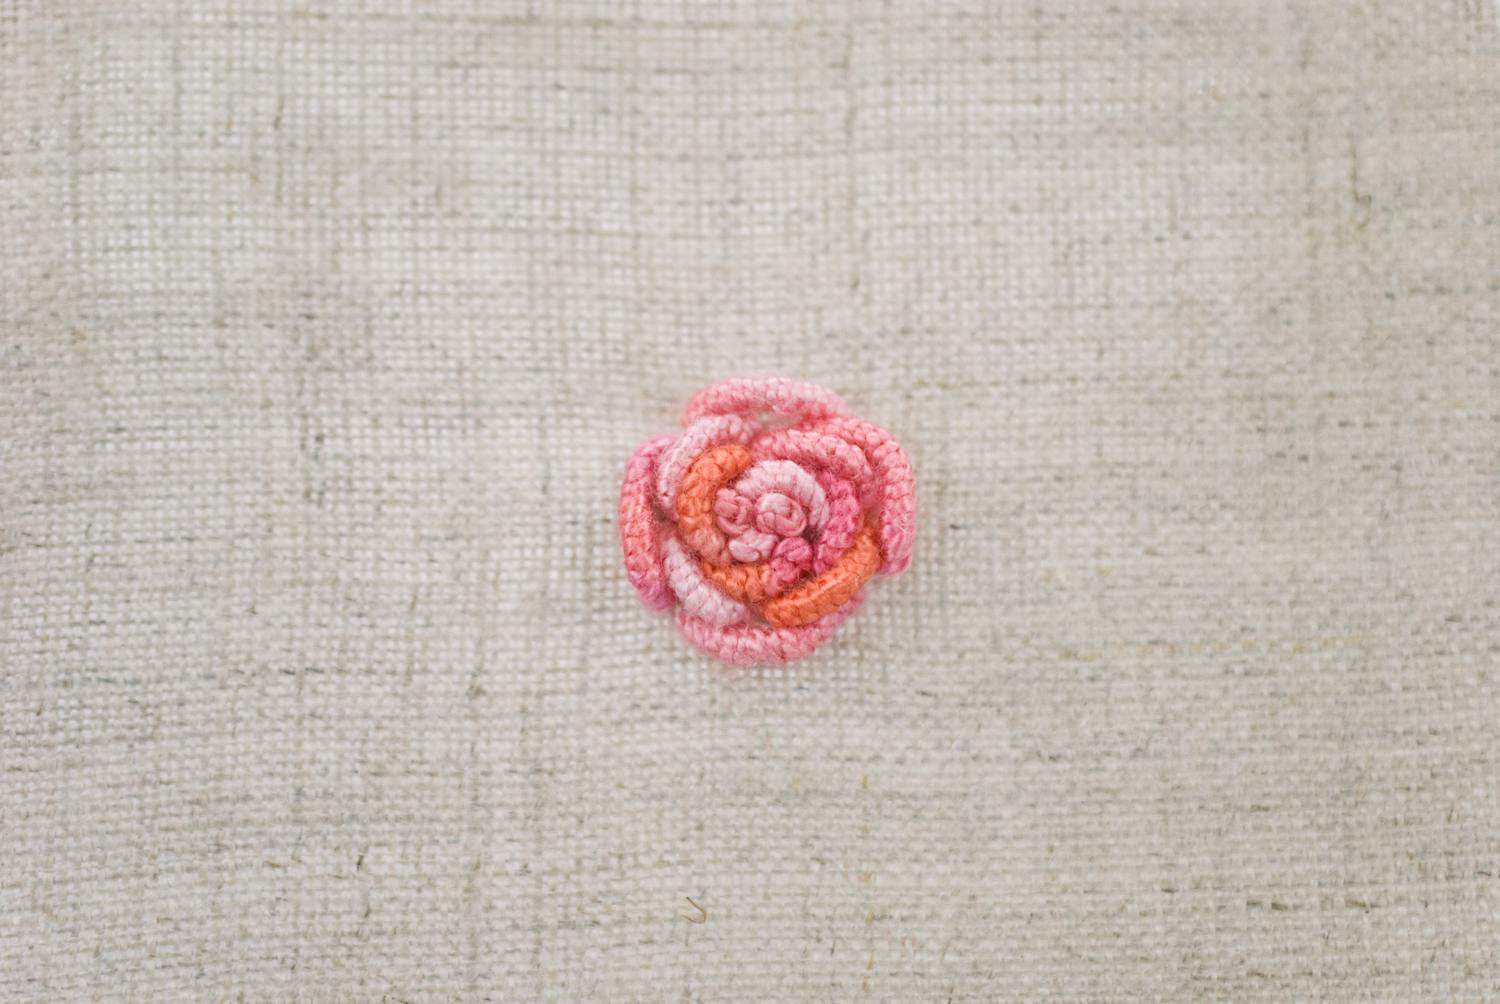 How To Make Embroidery Patterns 15 Stitches Every Embroiderer Should Know